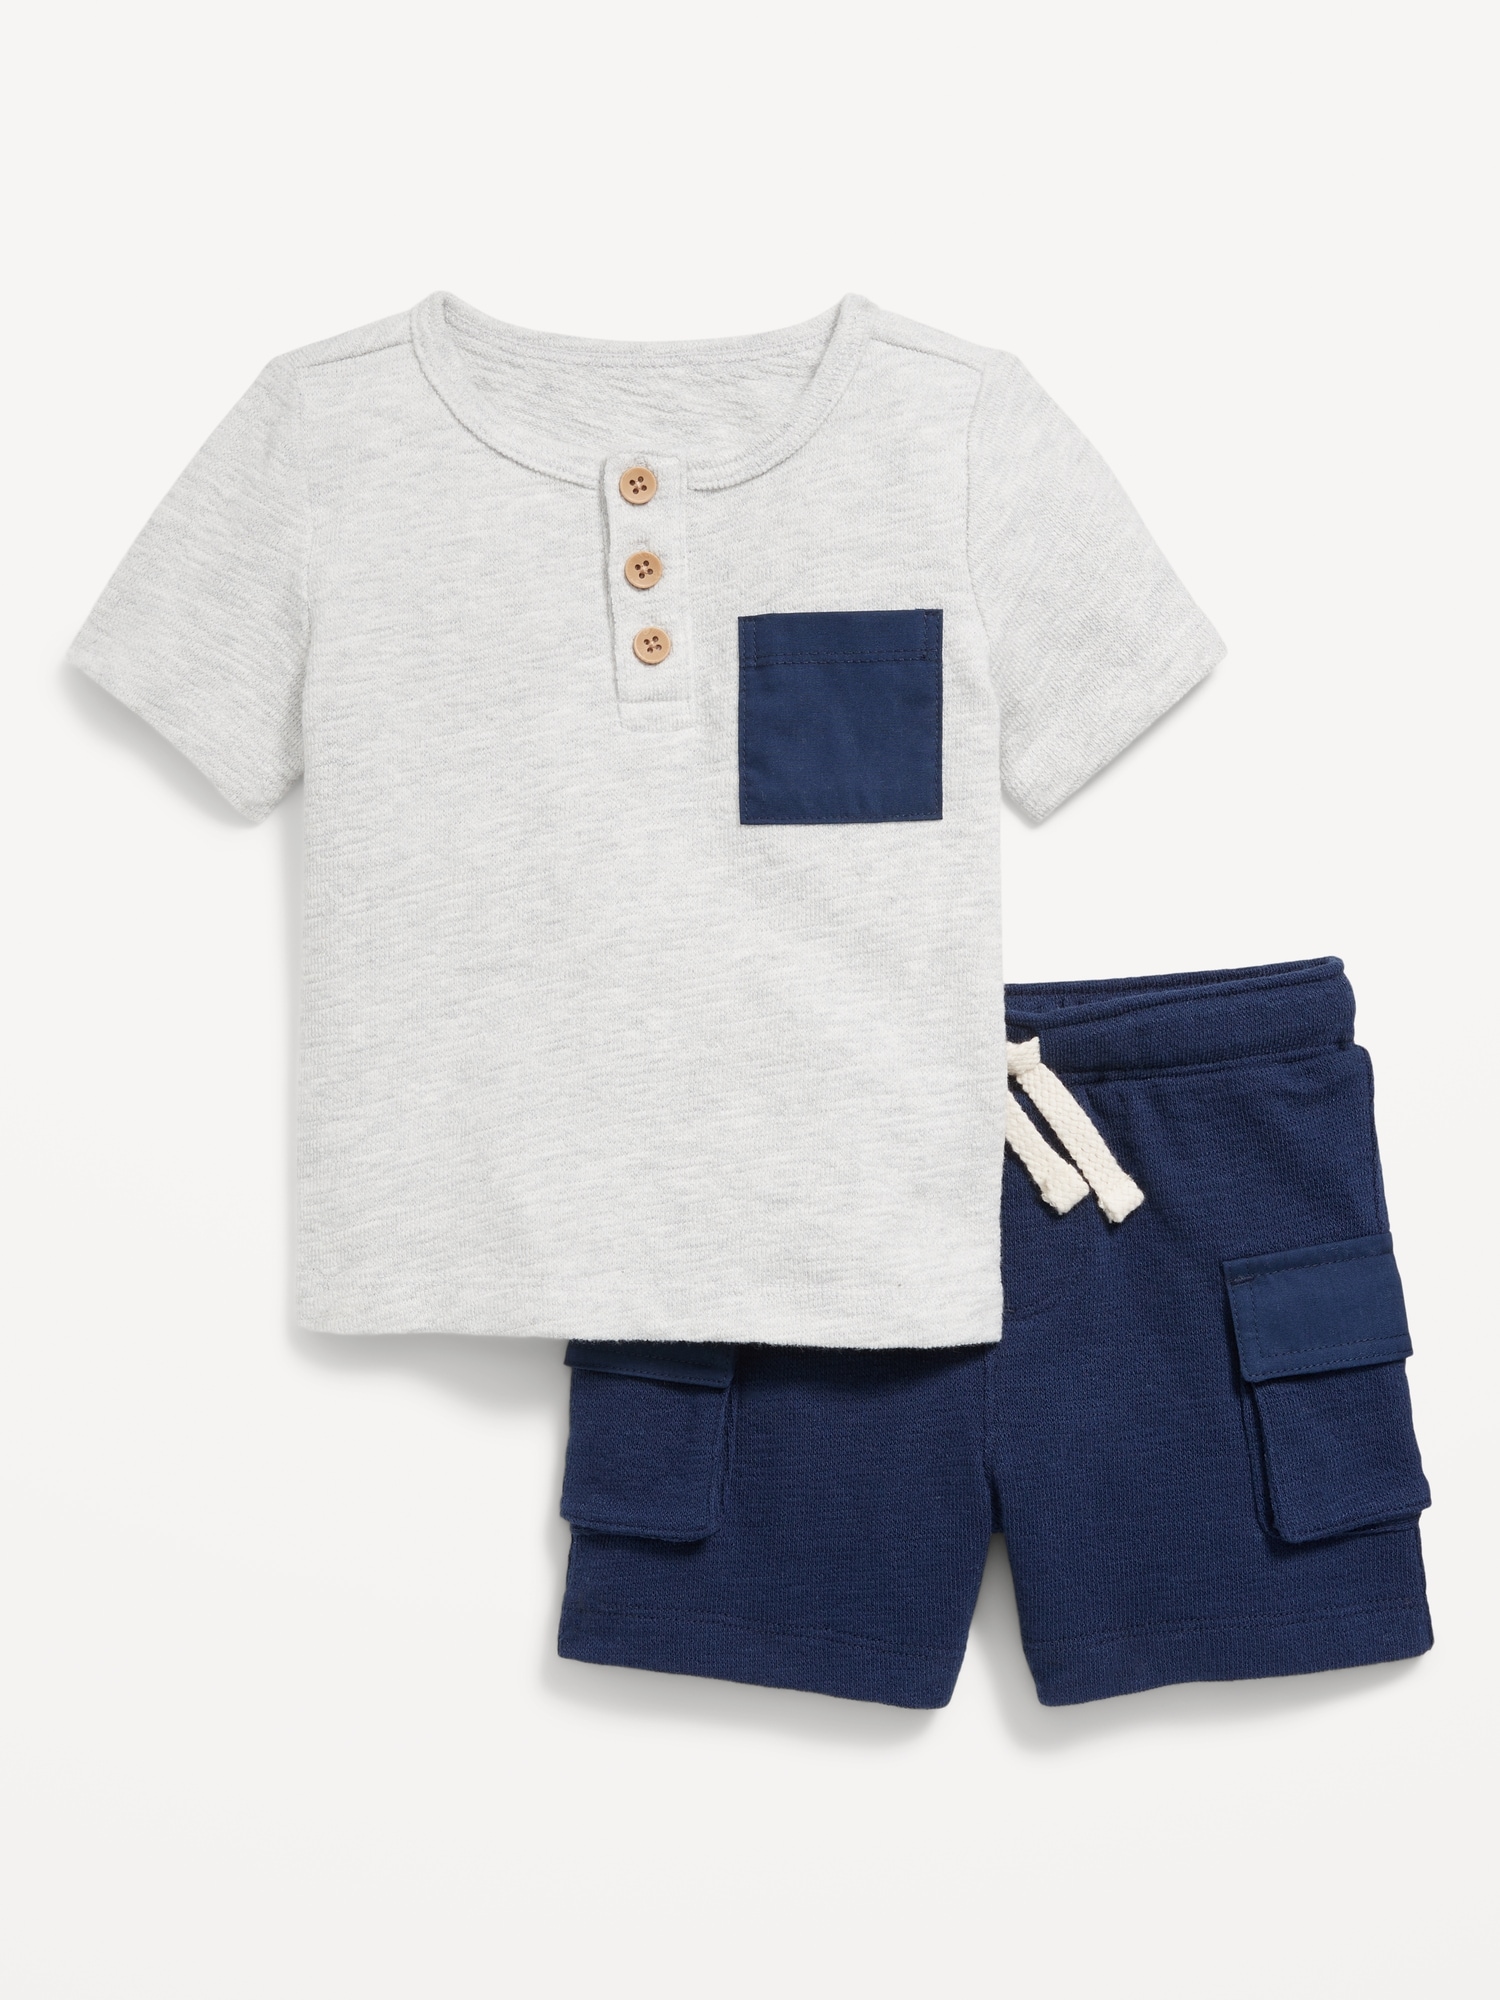 Textured Henley Pocket T-Shirt and Shorts Set for Baby